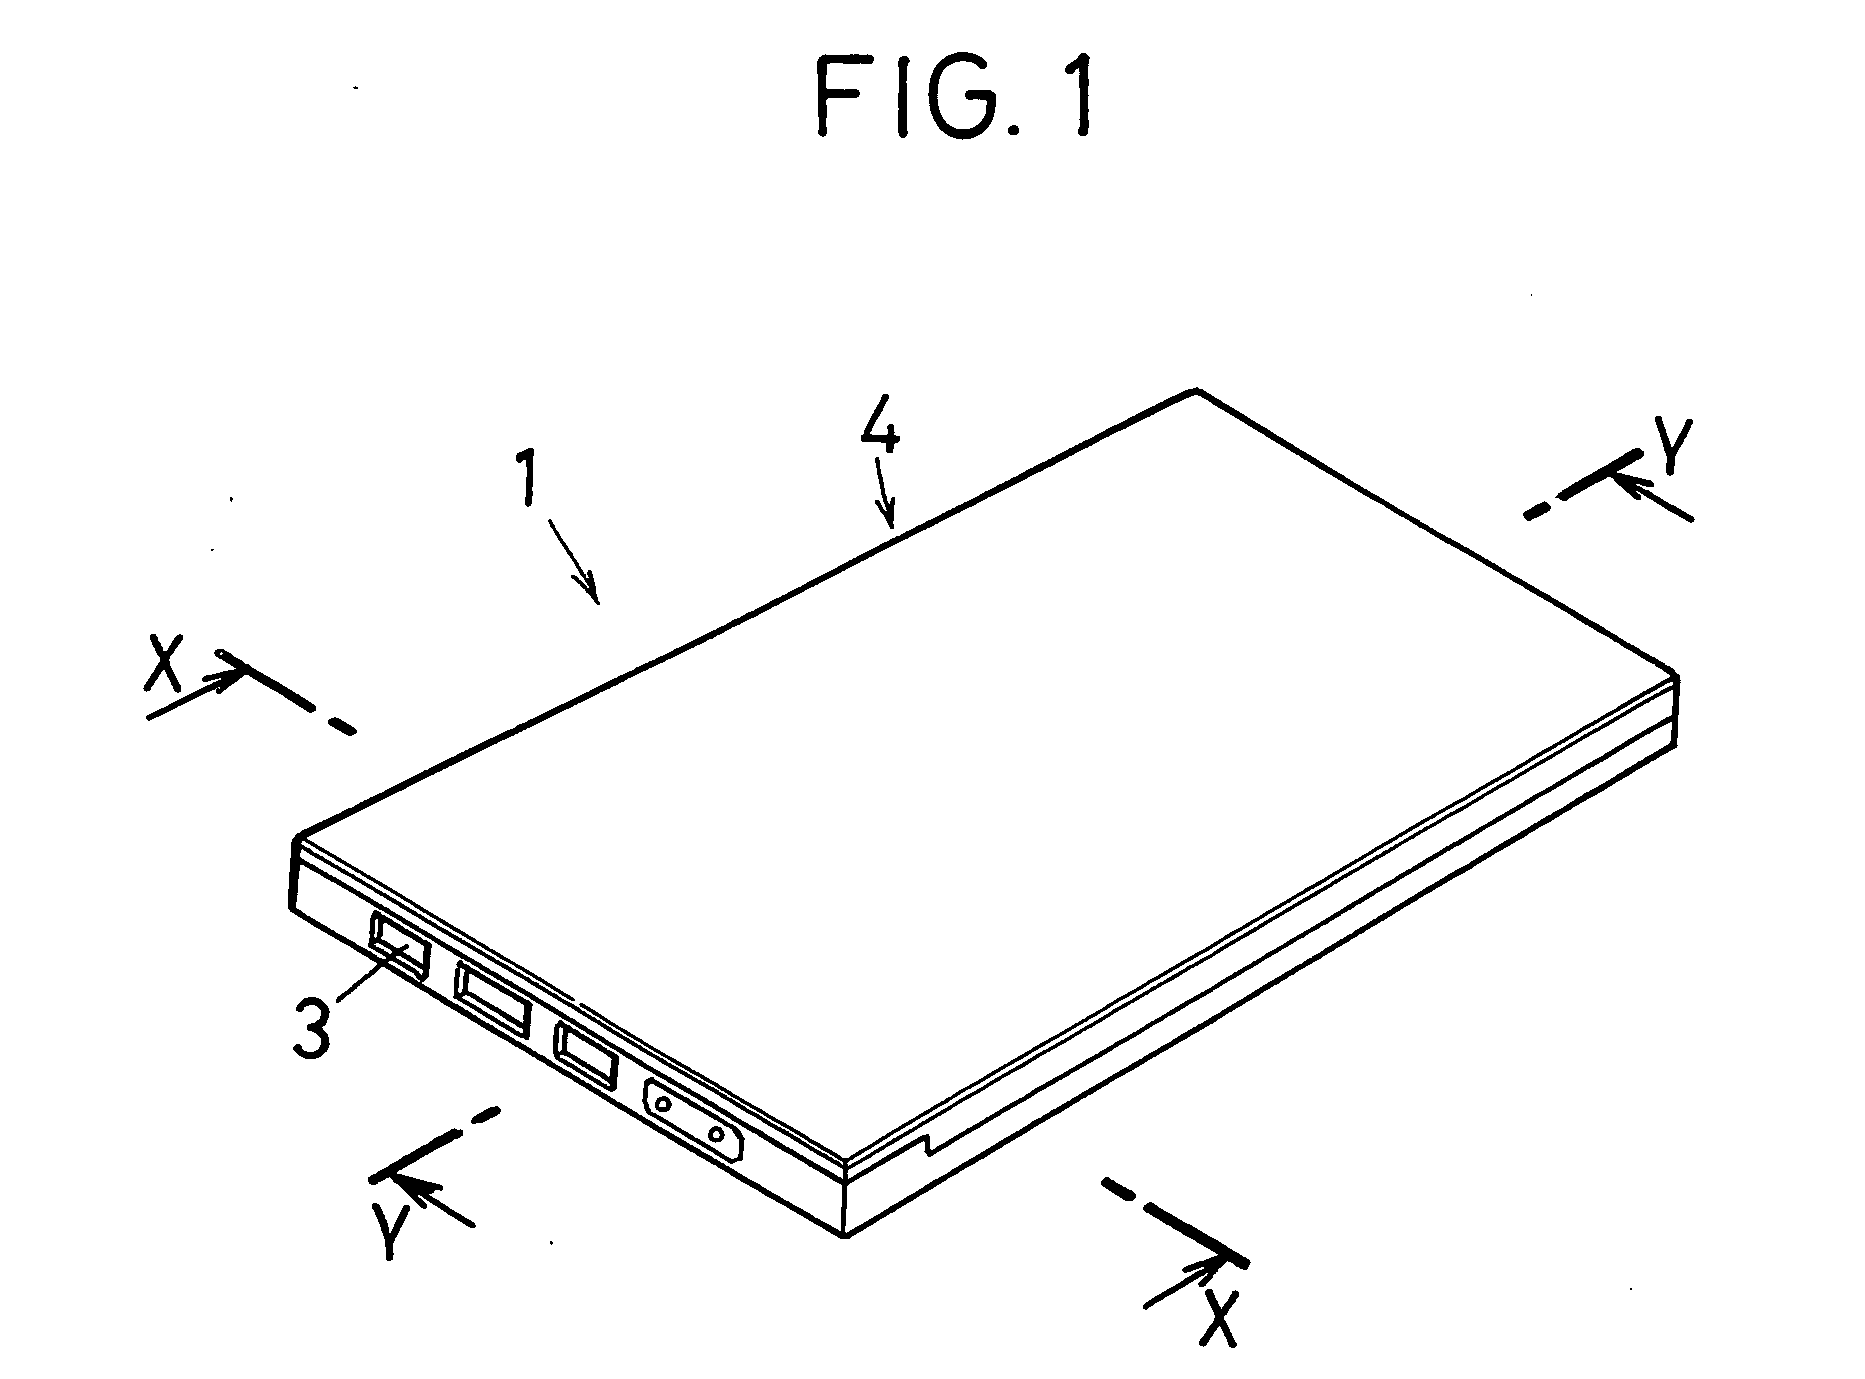 Outer case for non-aqueous electrolyte battery and method of producing the same